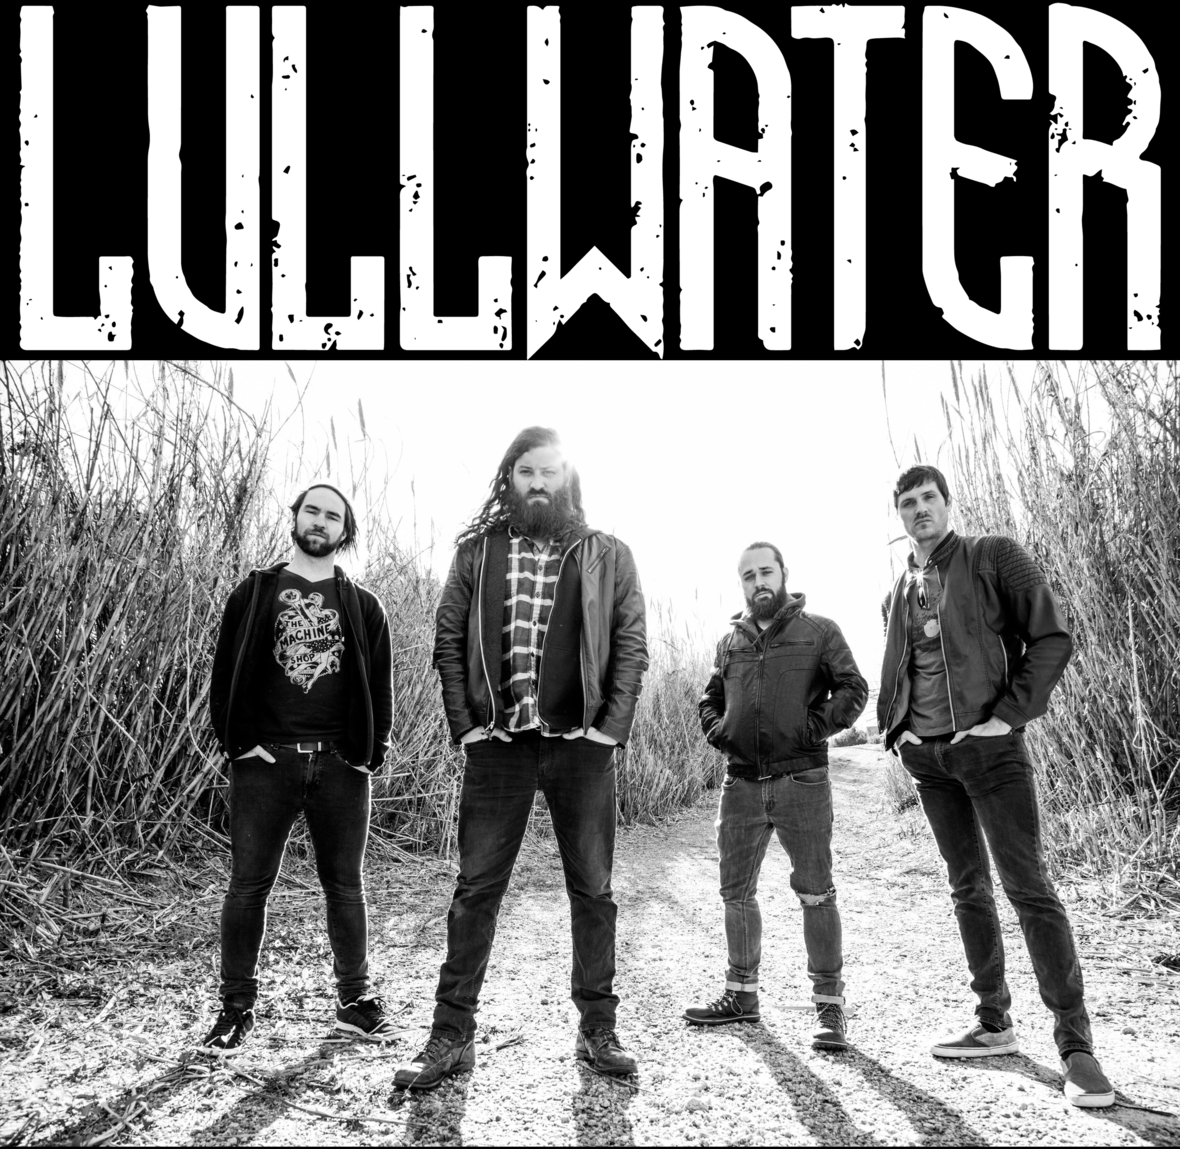 Lullwater Poster Nirvana Style 2